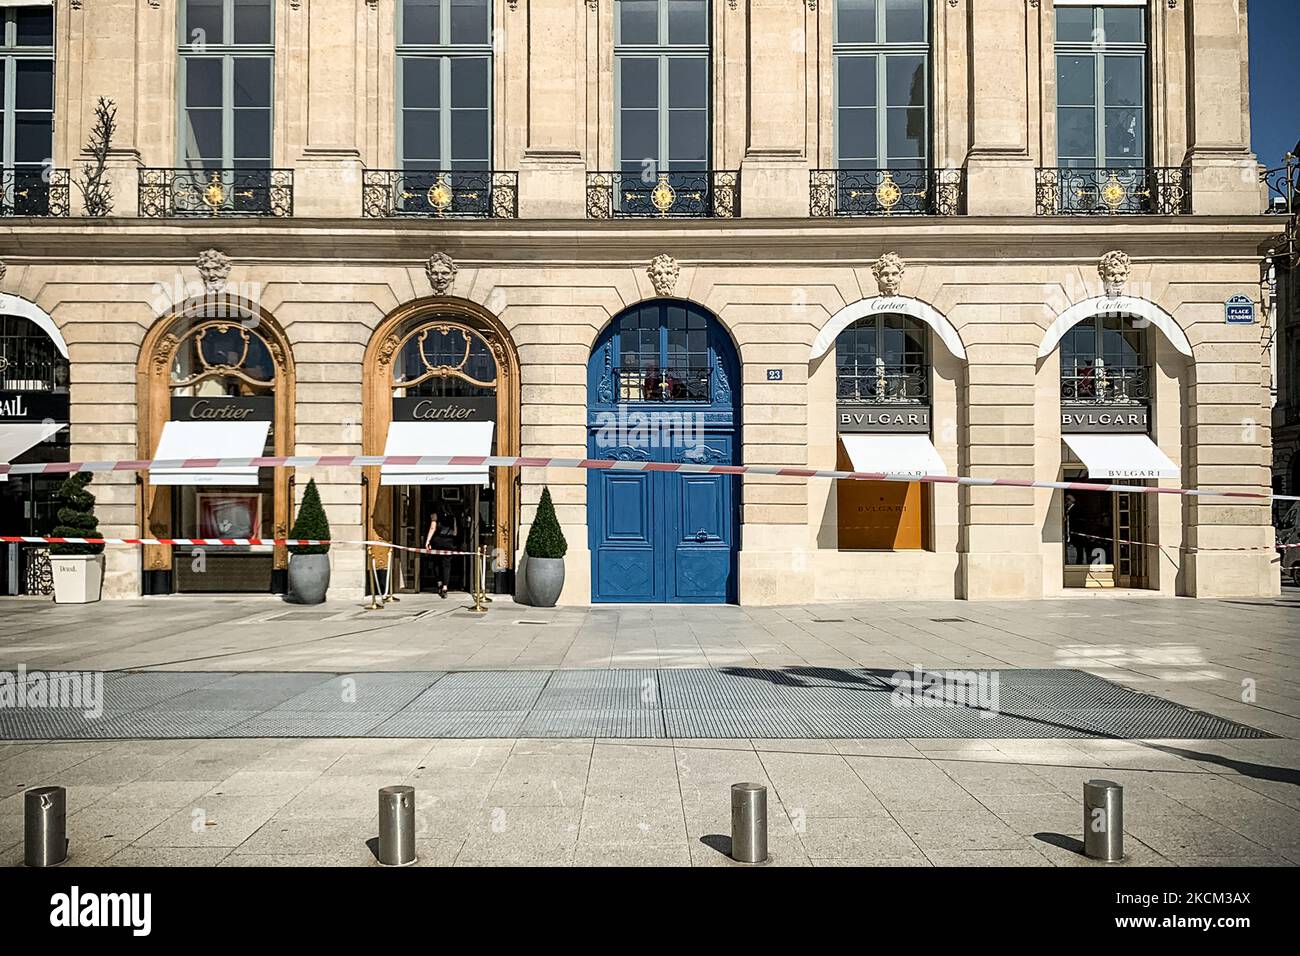 On September 7, 2021, around noon, several armed individuals robbed a jewelry store of the brand 'Bulgari' located in Place Vendôme in the center of Paris before fleeing during which a police officer was knocked down and a robber was shot. The police are on guard at the scene while the judicial police investigate inside the store. (Photo by Samuel Boivin/NurPhoto) Stock Photo